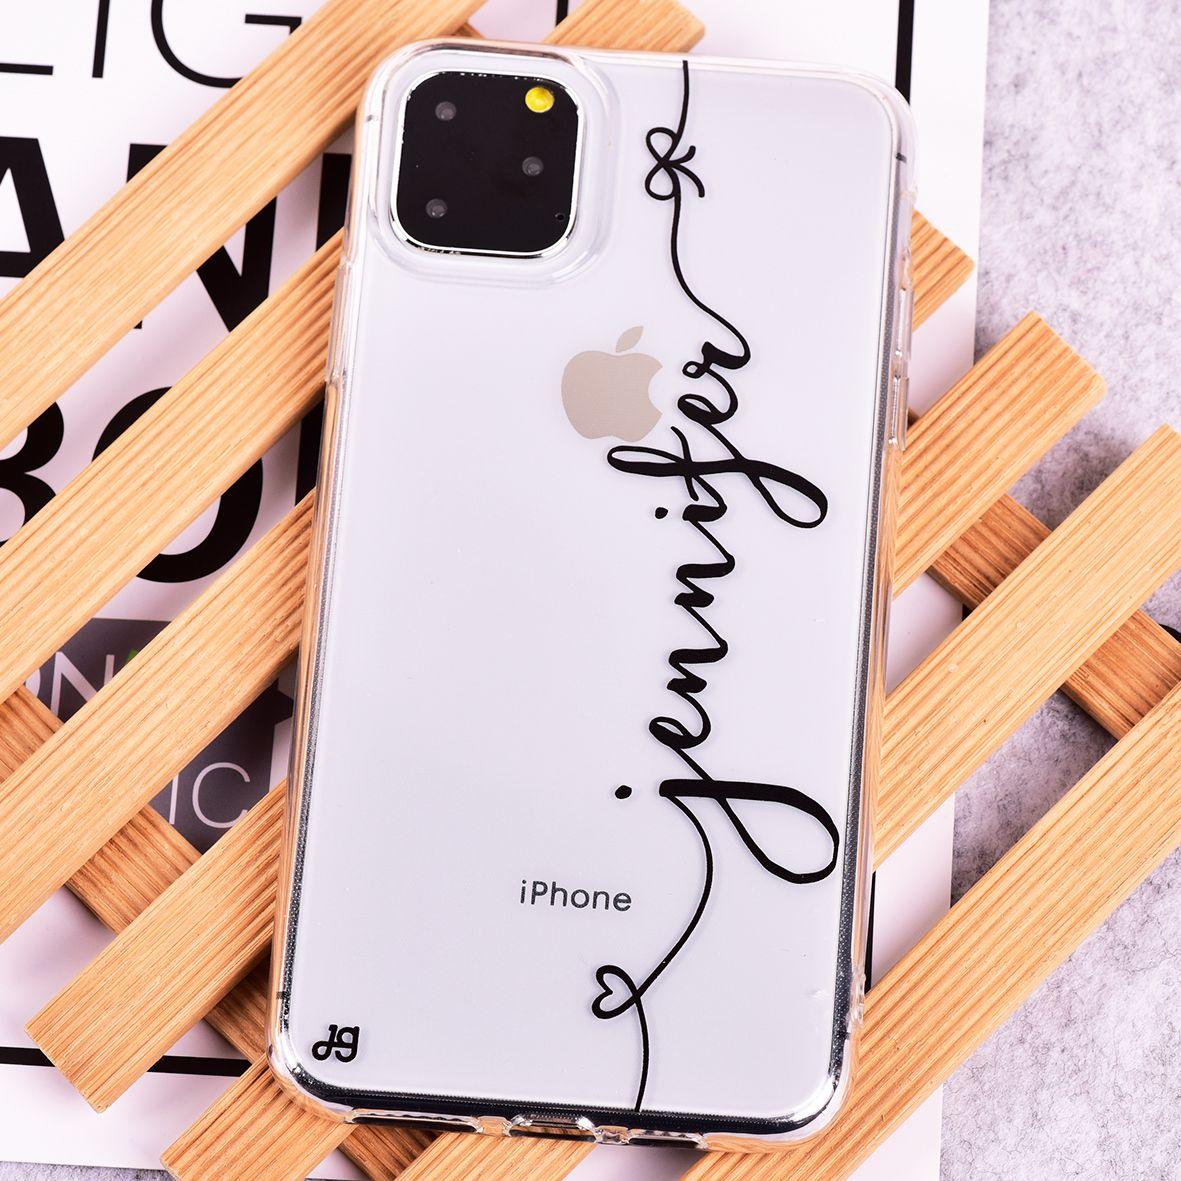 1181 x 1181 · jpeg - Think Different iPhone 11 Pro Max Soft Clear Case | Iphone, Luxury ...